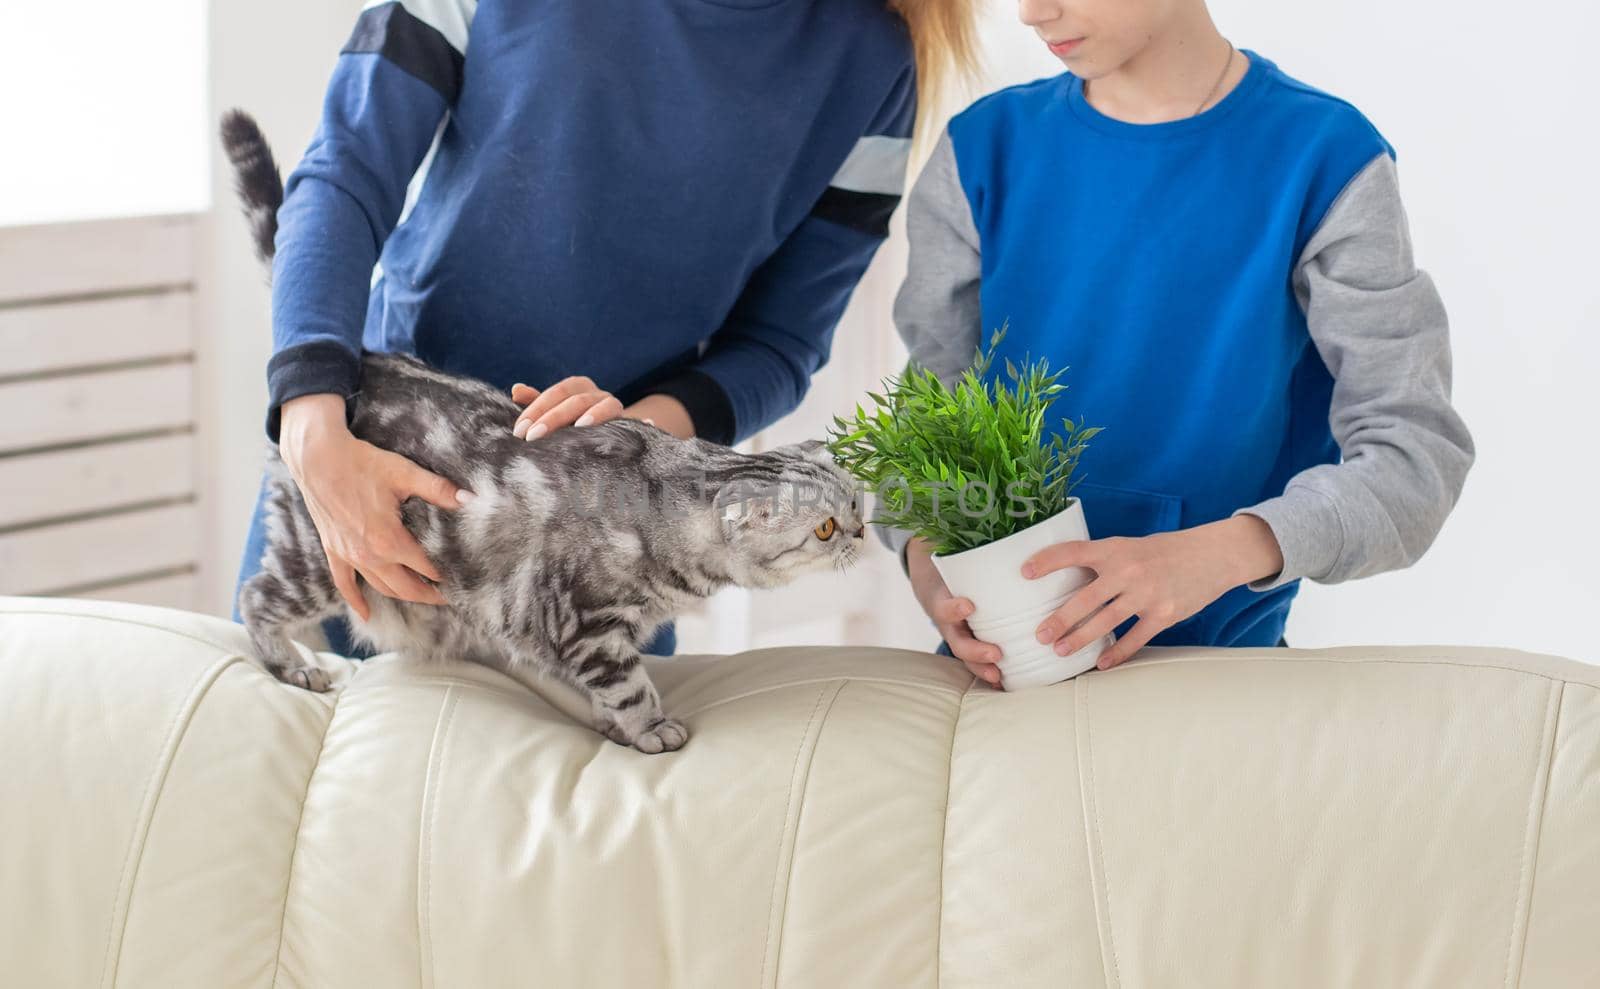 Young cute mother and son are happy about the move to new house holding a lop-eared scottish cat and a pot of greens in their hands. Concept of housewarming and family space extensions